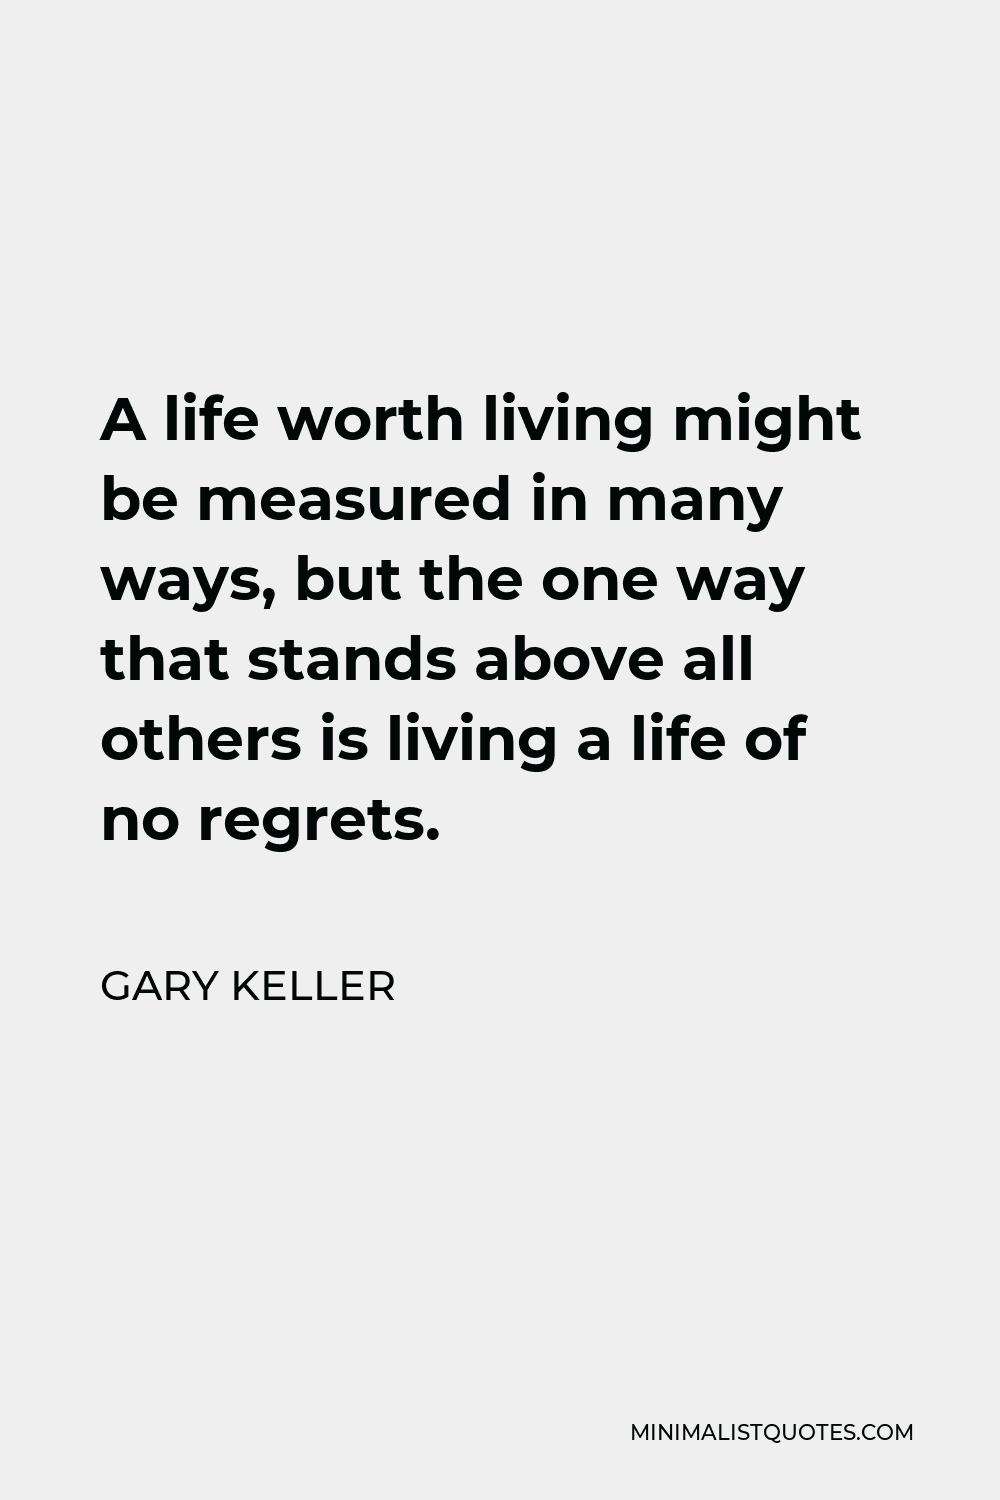 Gary Keller Quote - A life worth living might be measured in many ways, but the one way that stands above all others is living a life of no regrets.